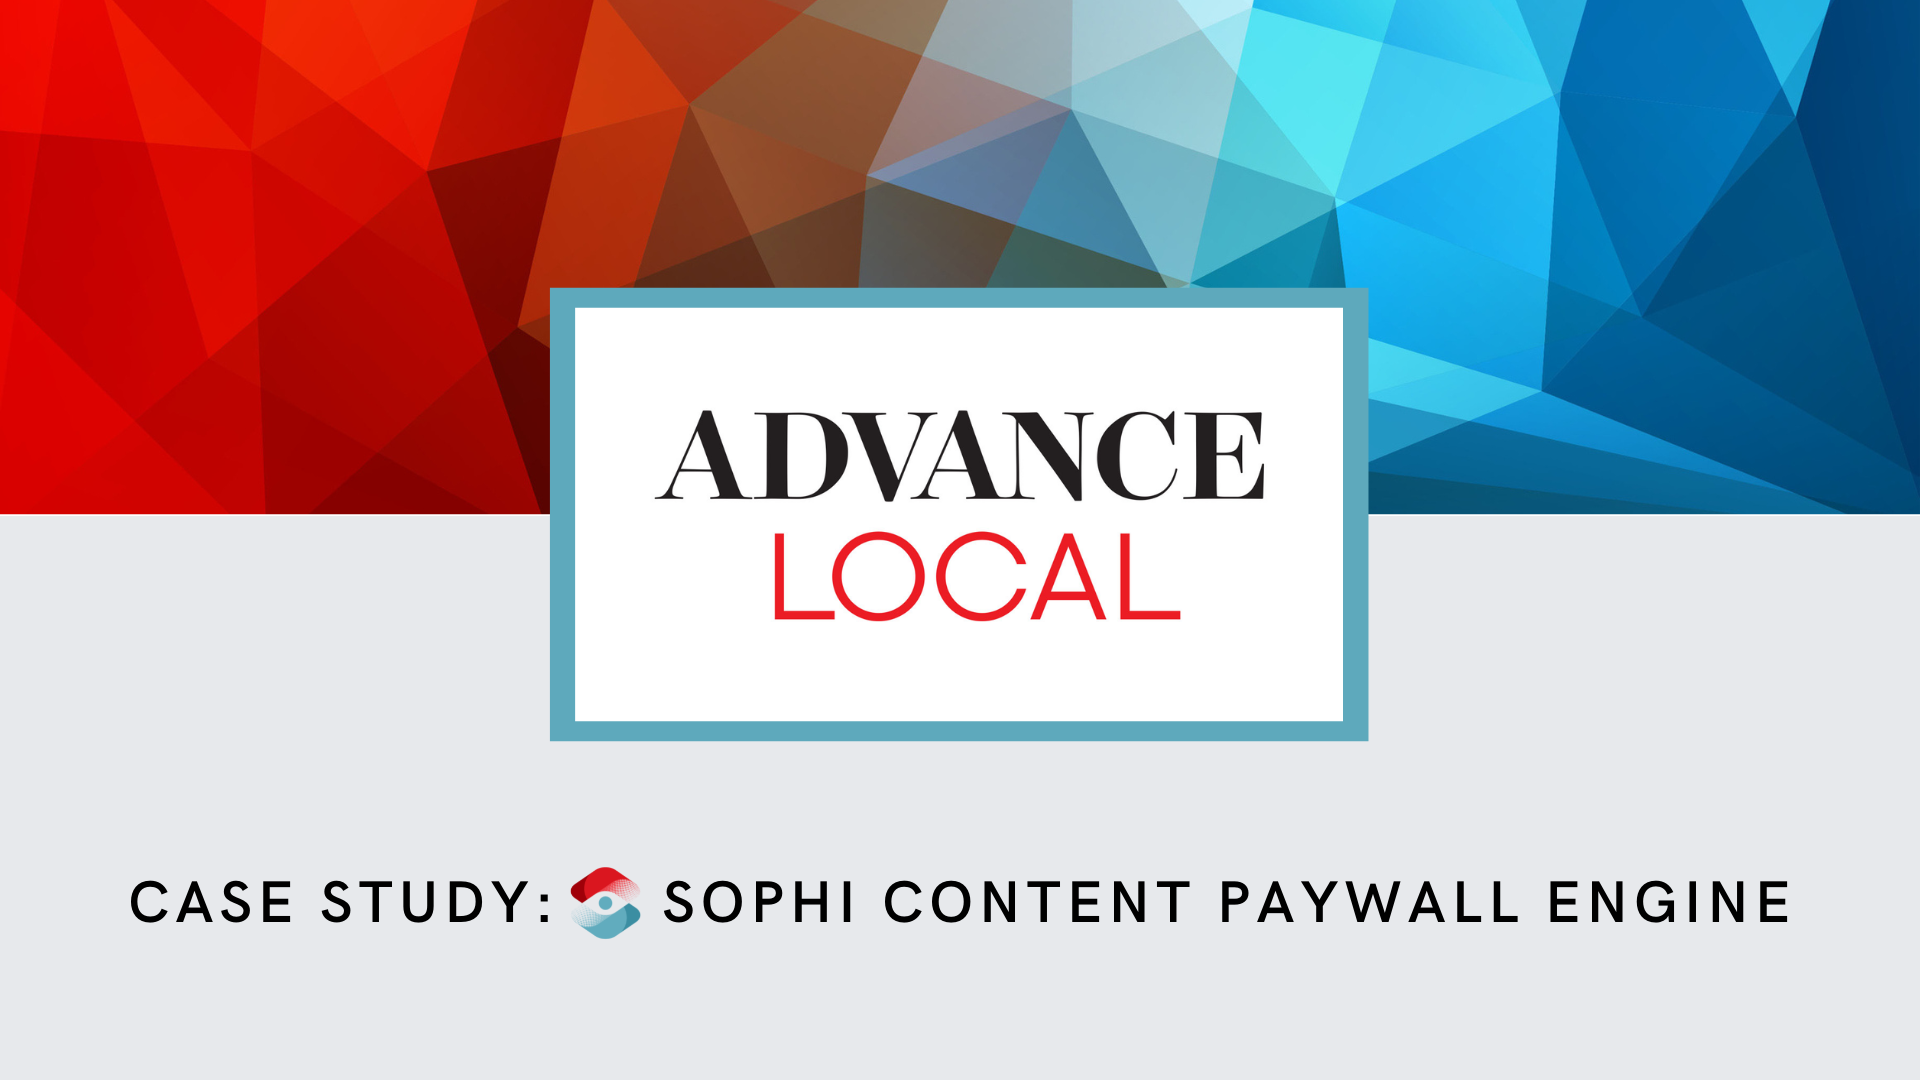 Sophi Content Paywall Engine and Advance Local